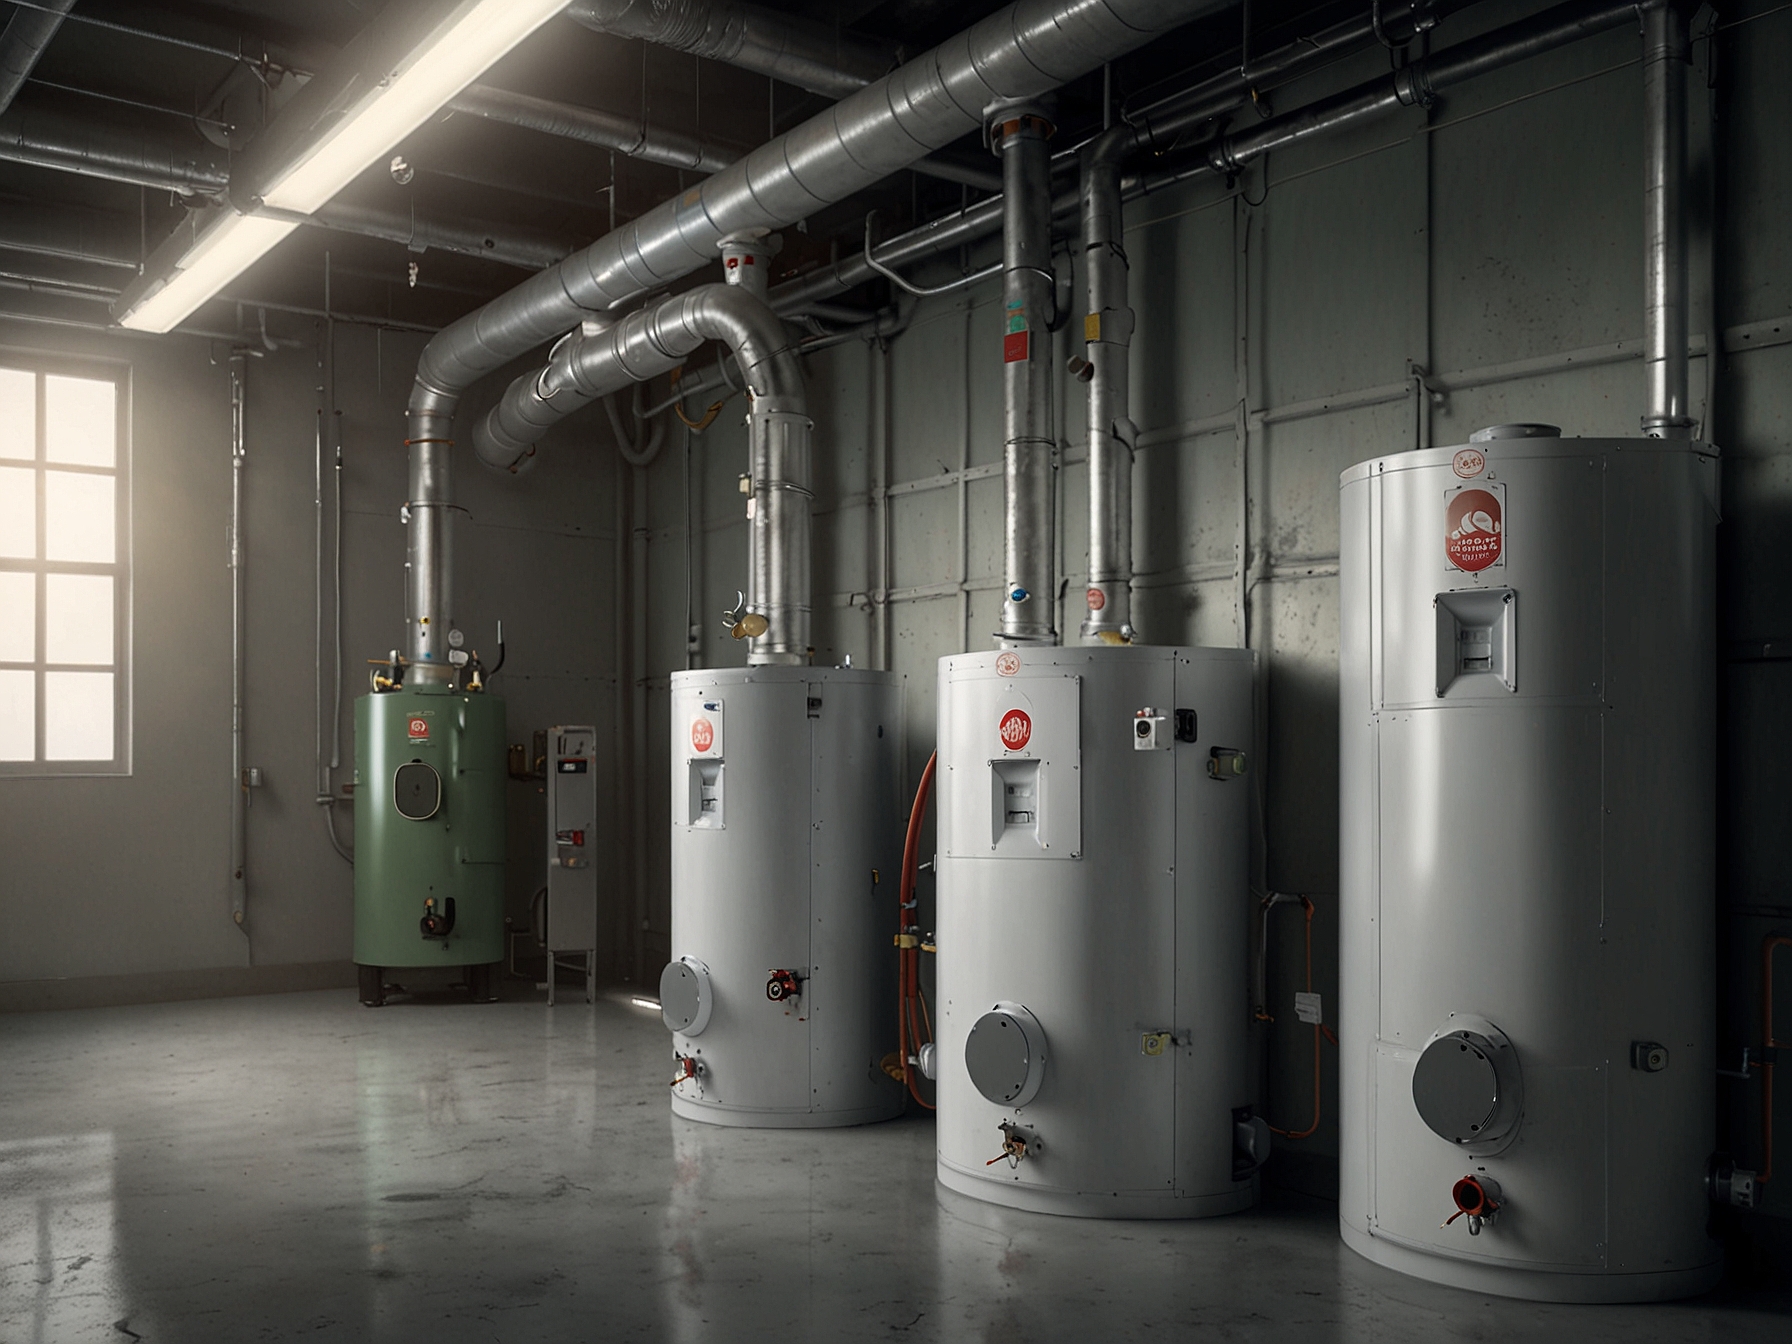 An image of Rheem's new energy-efficient water heaters and HVAC systems, highlighting their eco-friendly and high-performance features designed to reduce greenhouse gas emissions.